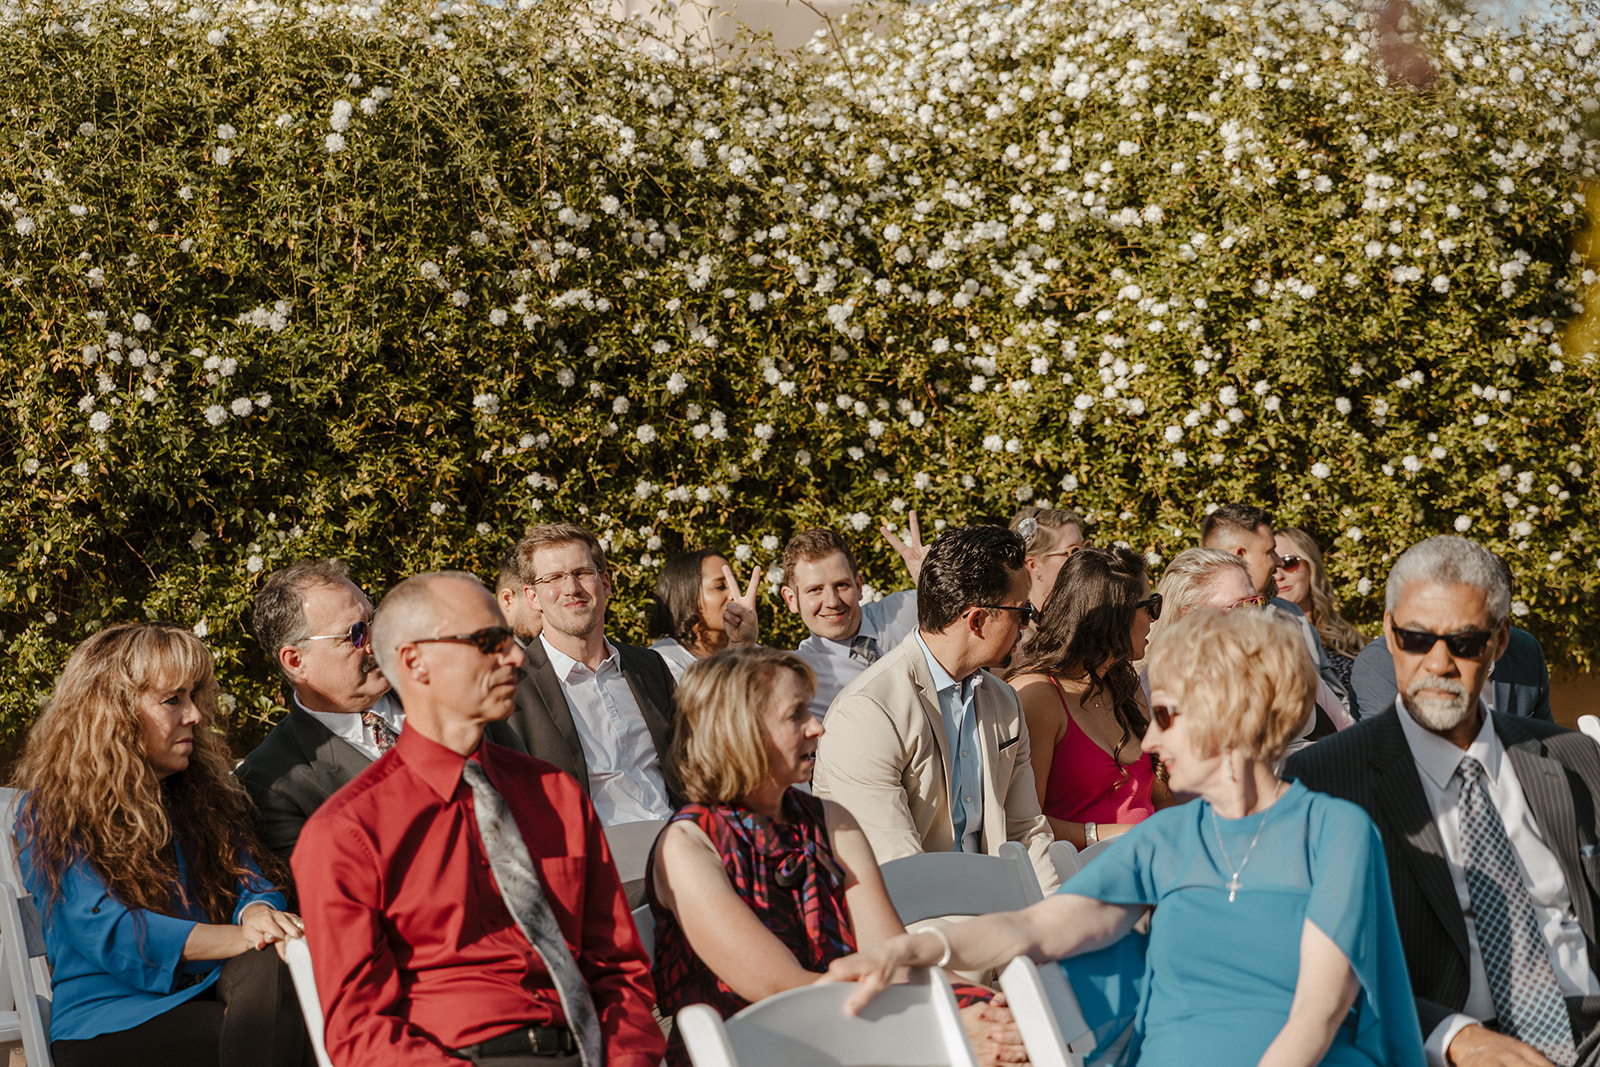 Guests look on during the stunning wedding day